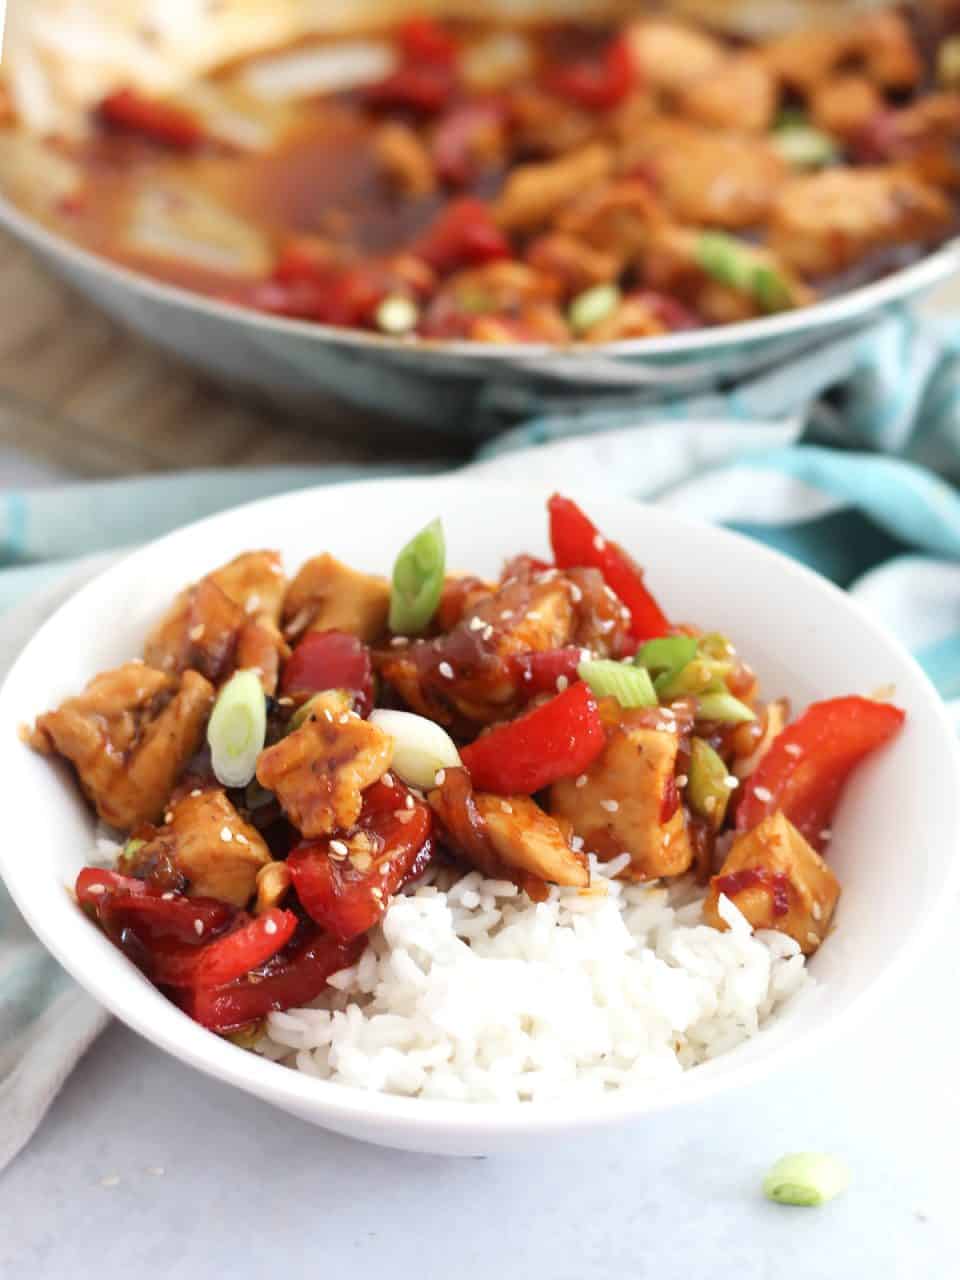 Honey sriracha chicken served in a bowl over rice.